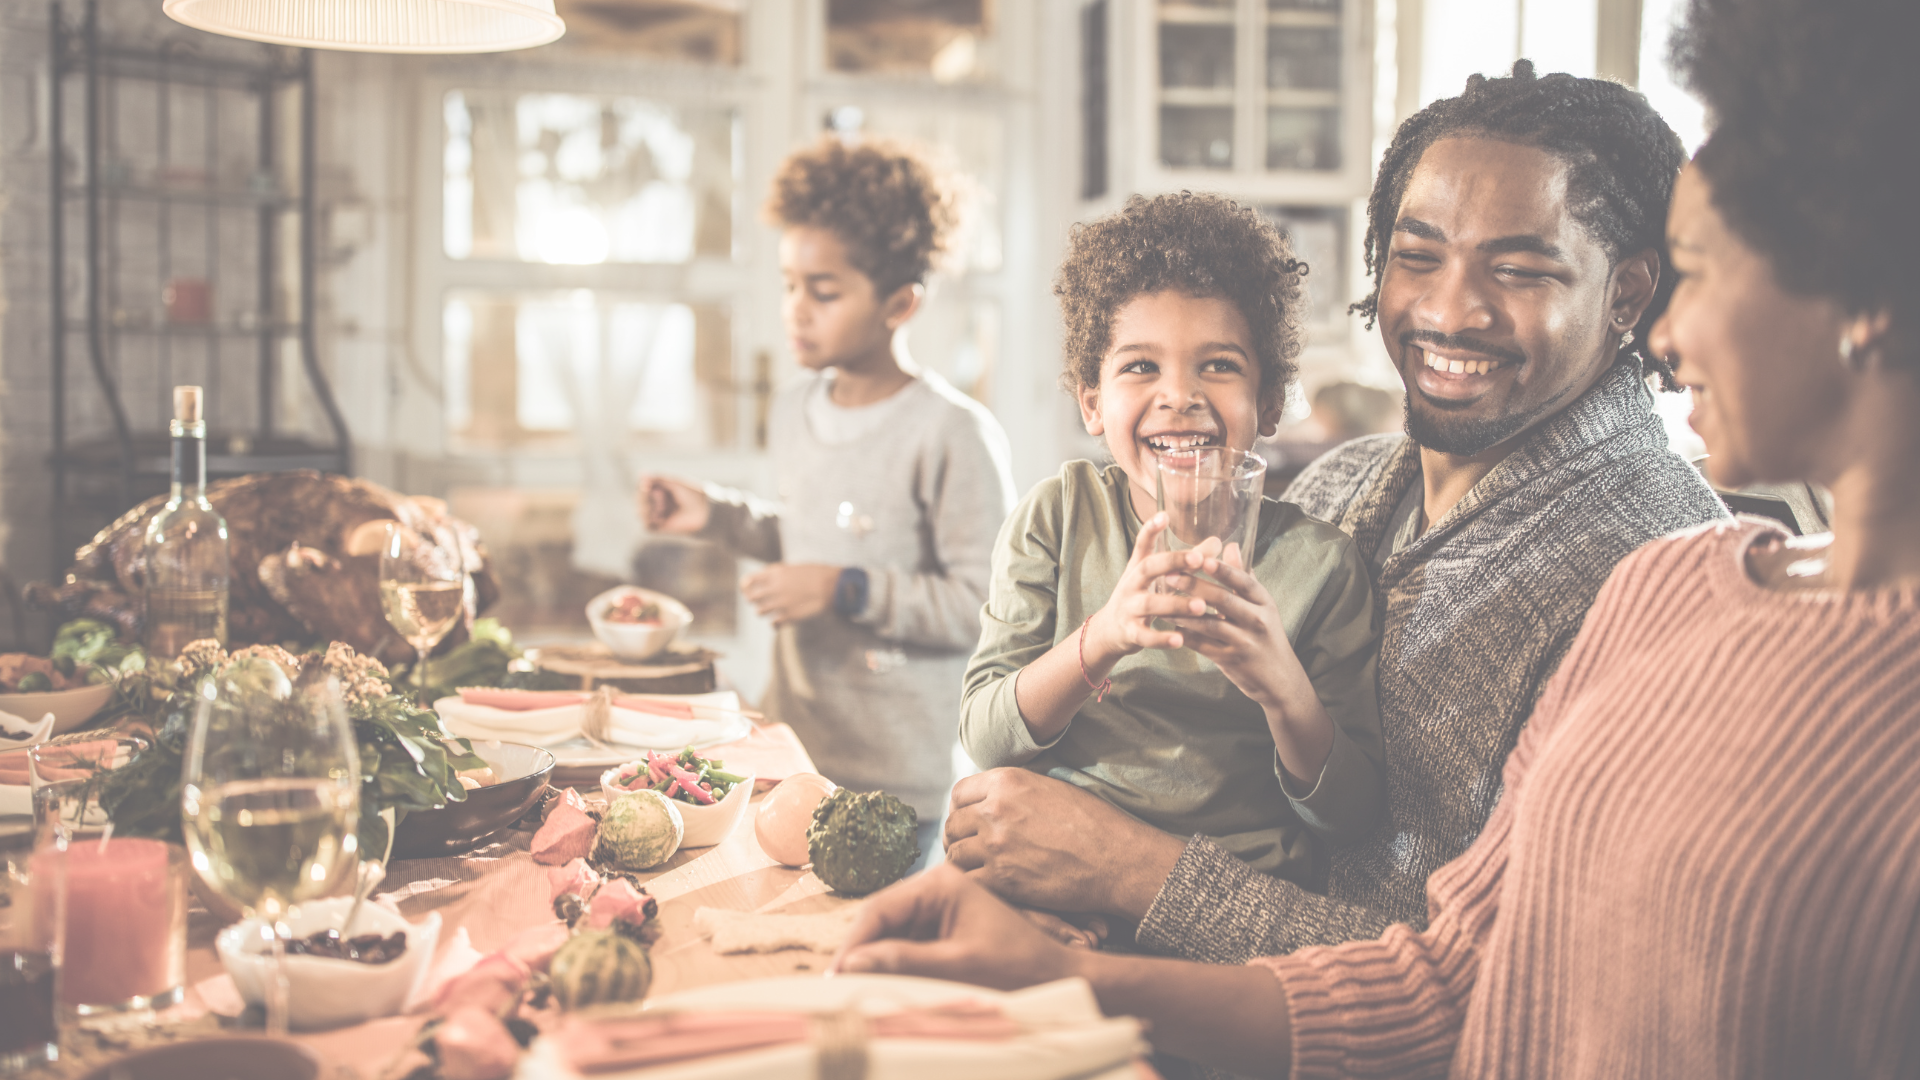 Photo: “Happy black family communicating during Thanksgiving meal in dining room” by skynesher